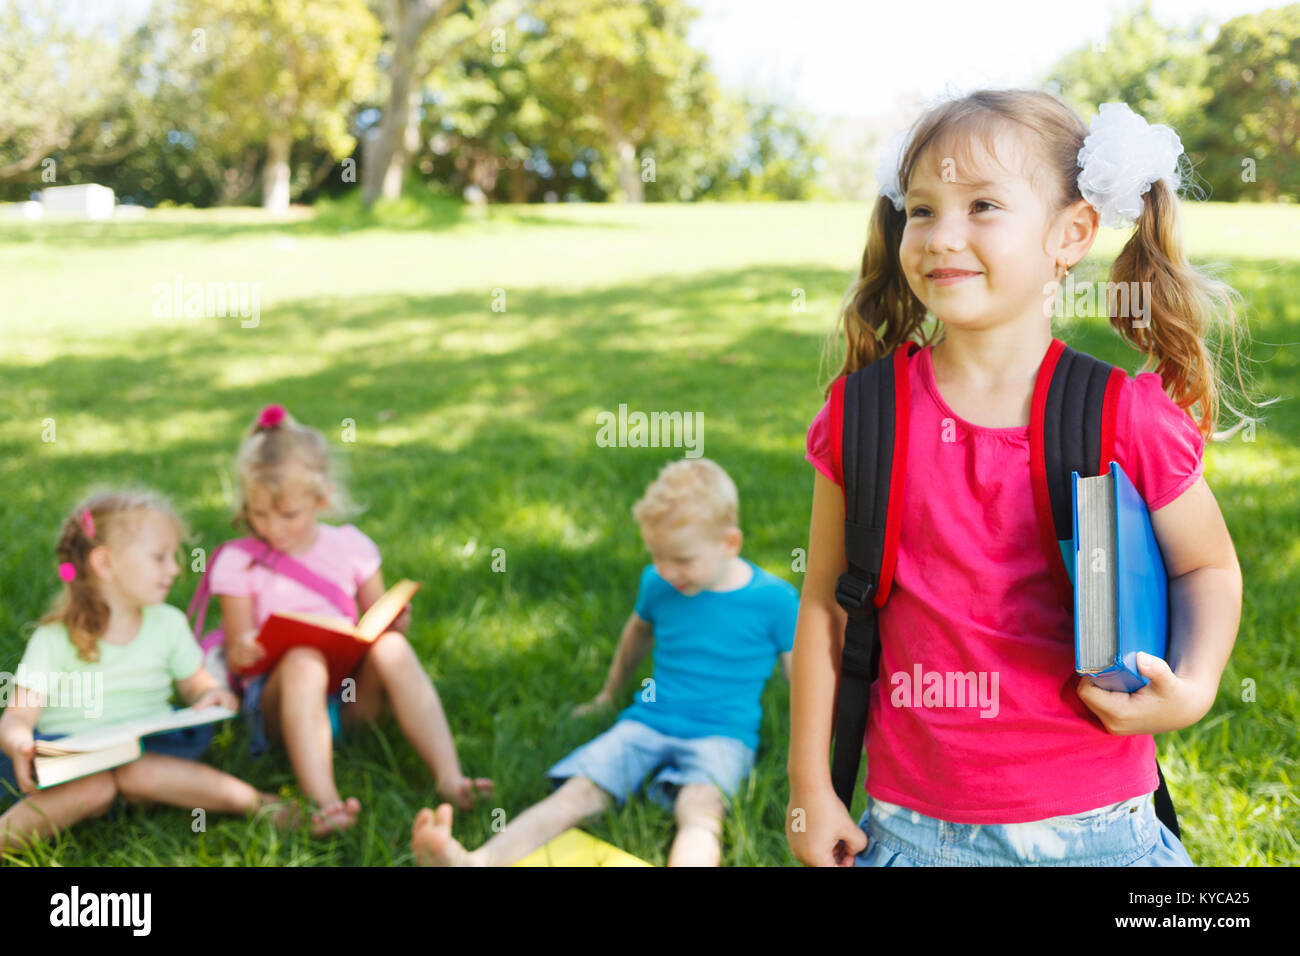 Preschooler girl with book and her friends Stock Photo